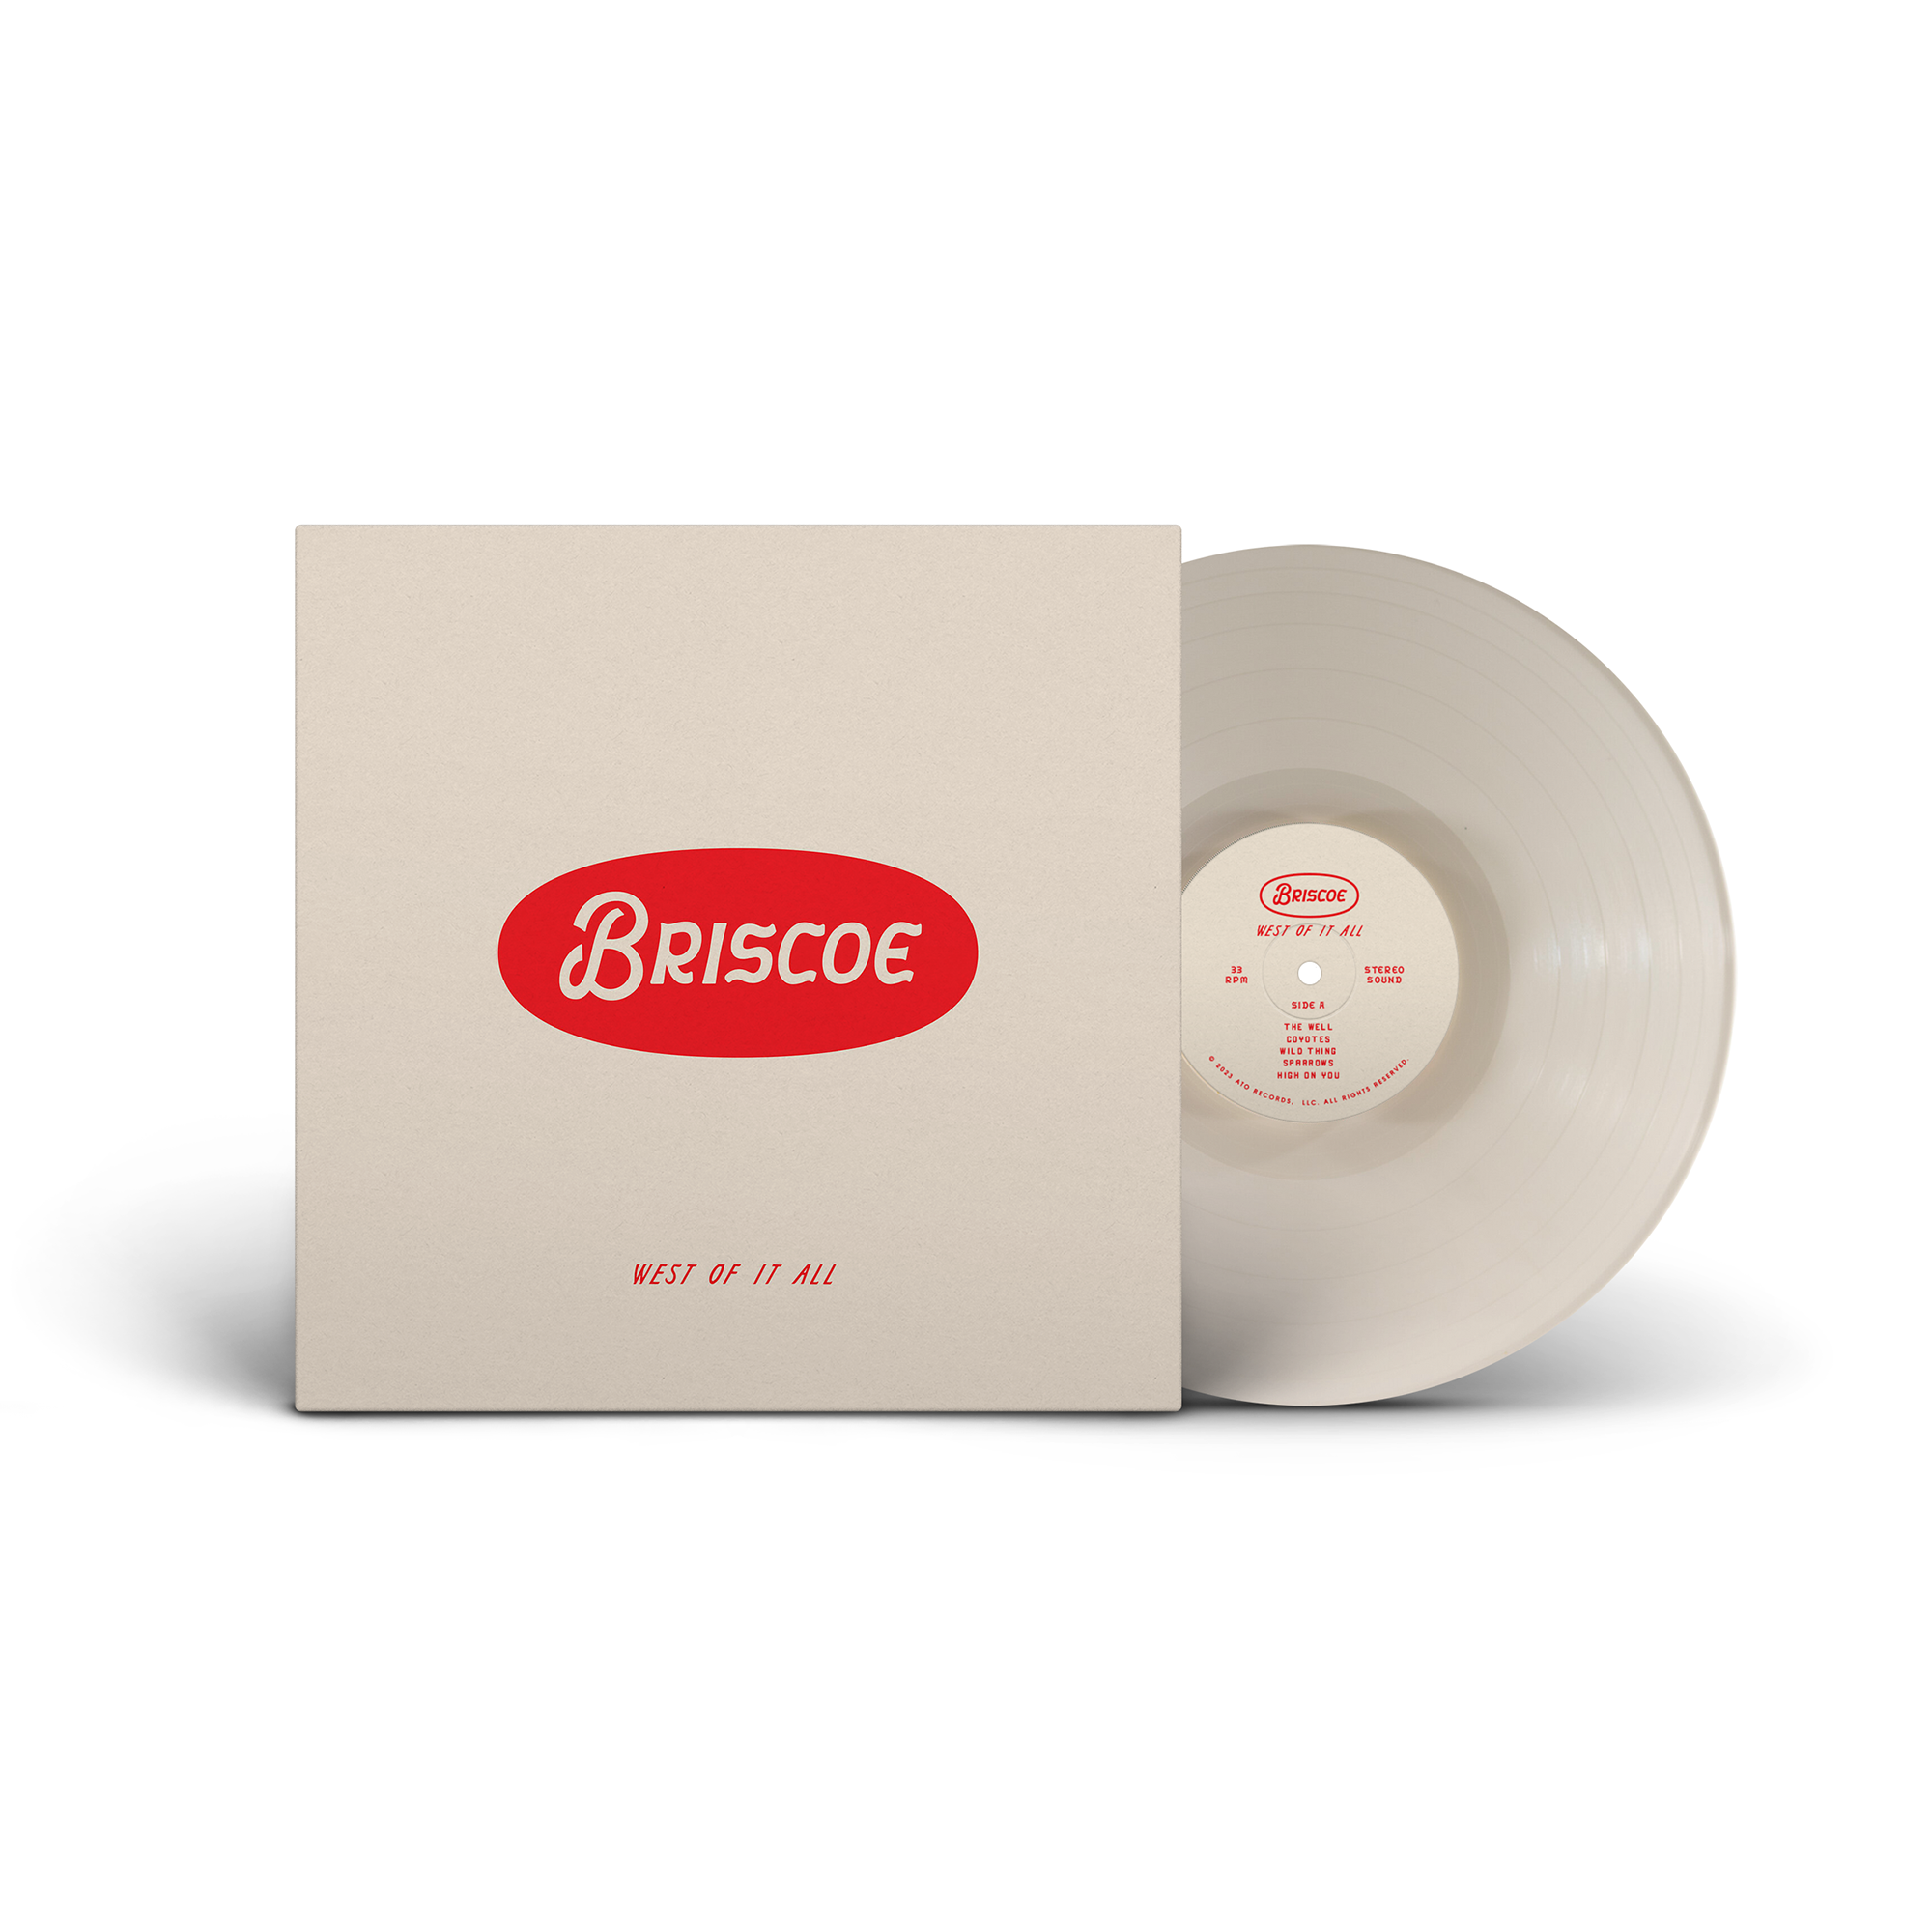 Briscoe - West of It All: Limited White Opaque Vinyl LP